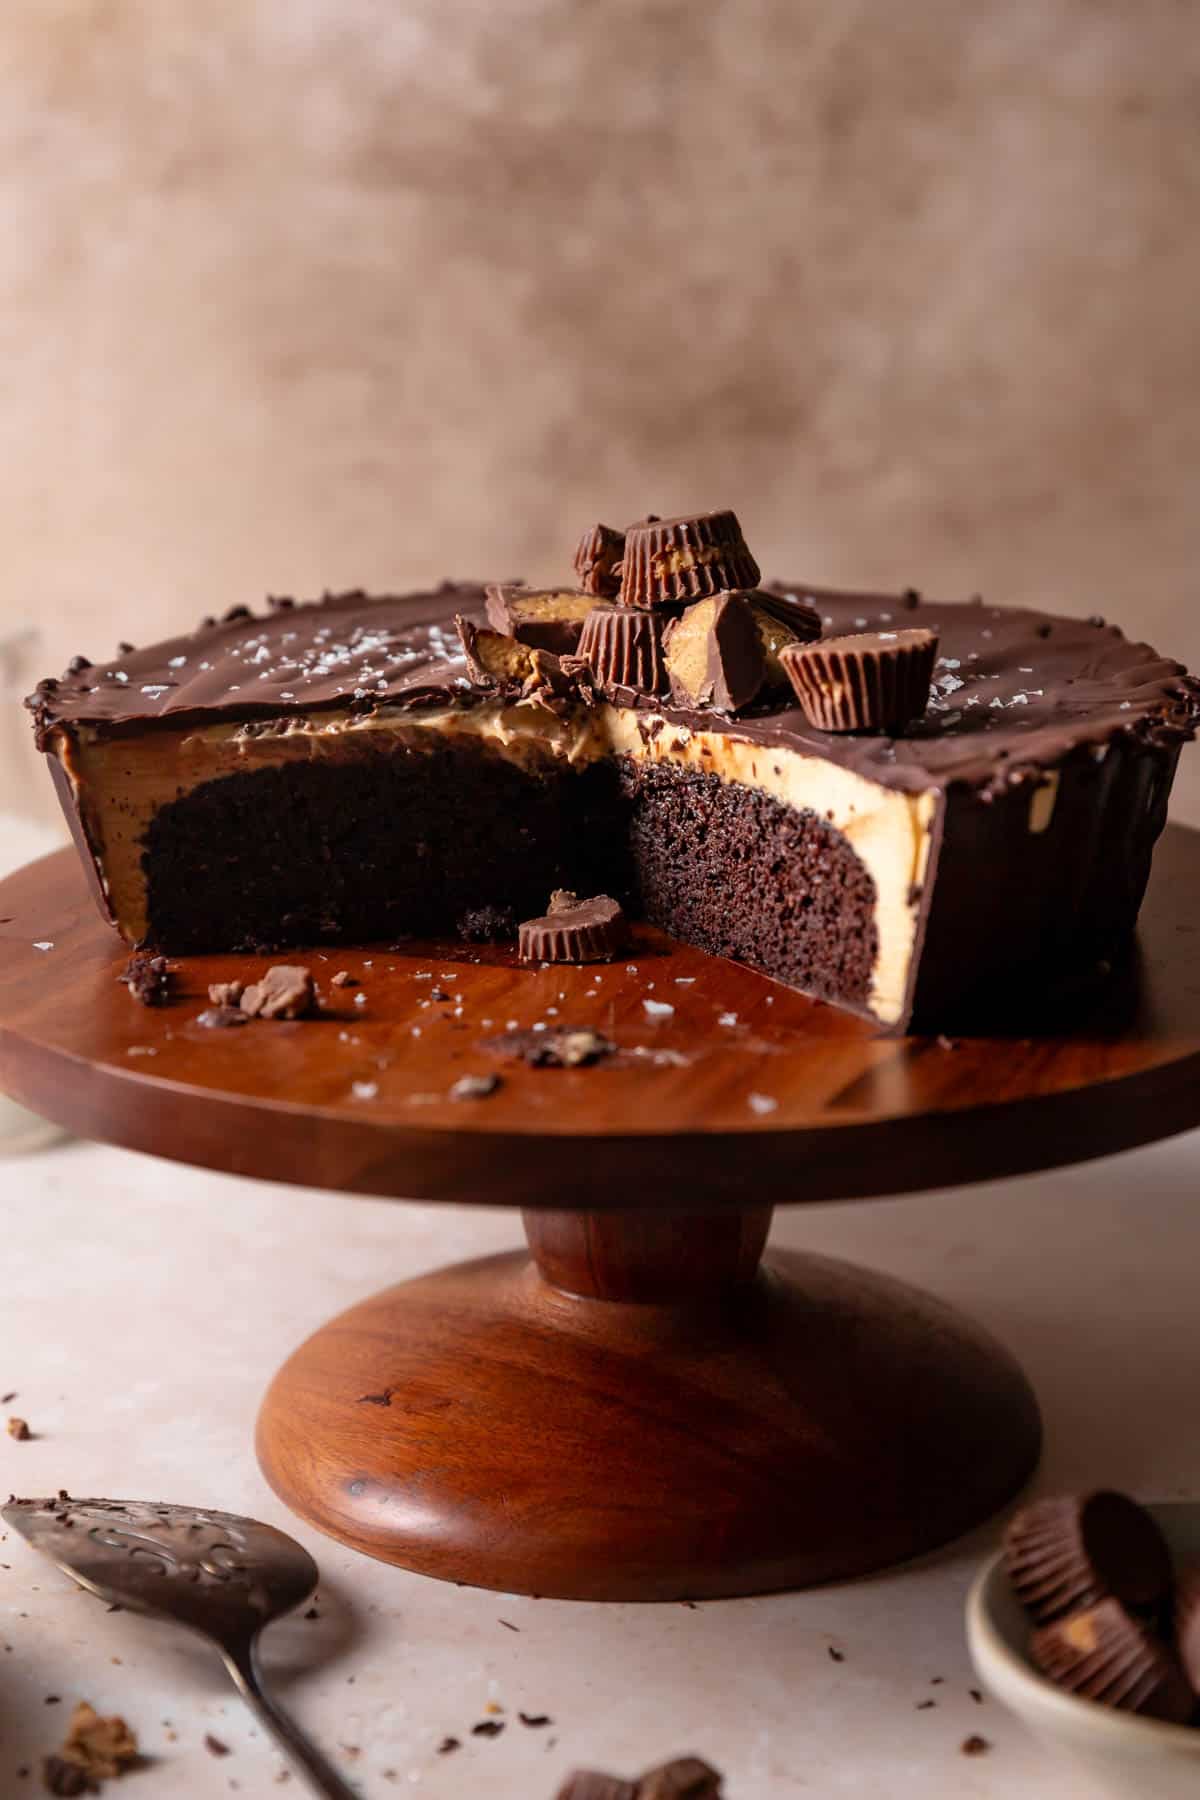 Reeses peanut butter cake on a wooden cake stand with some slices missing.